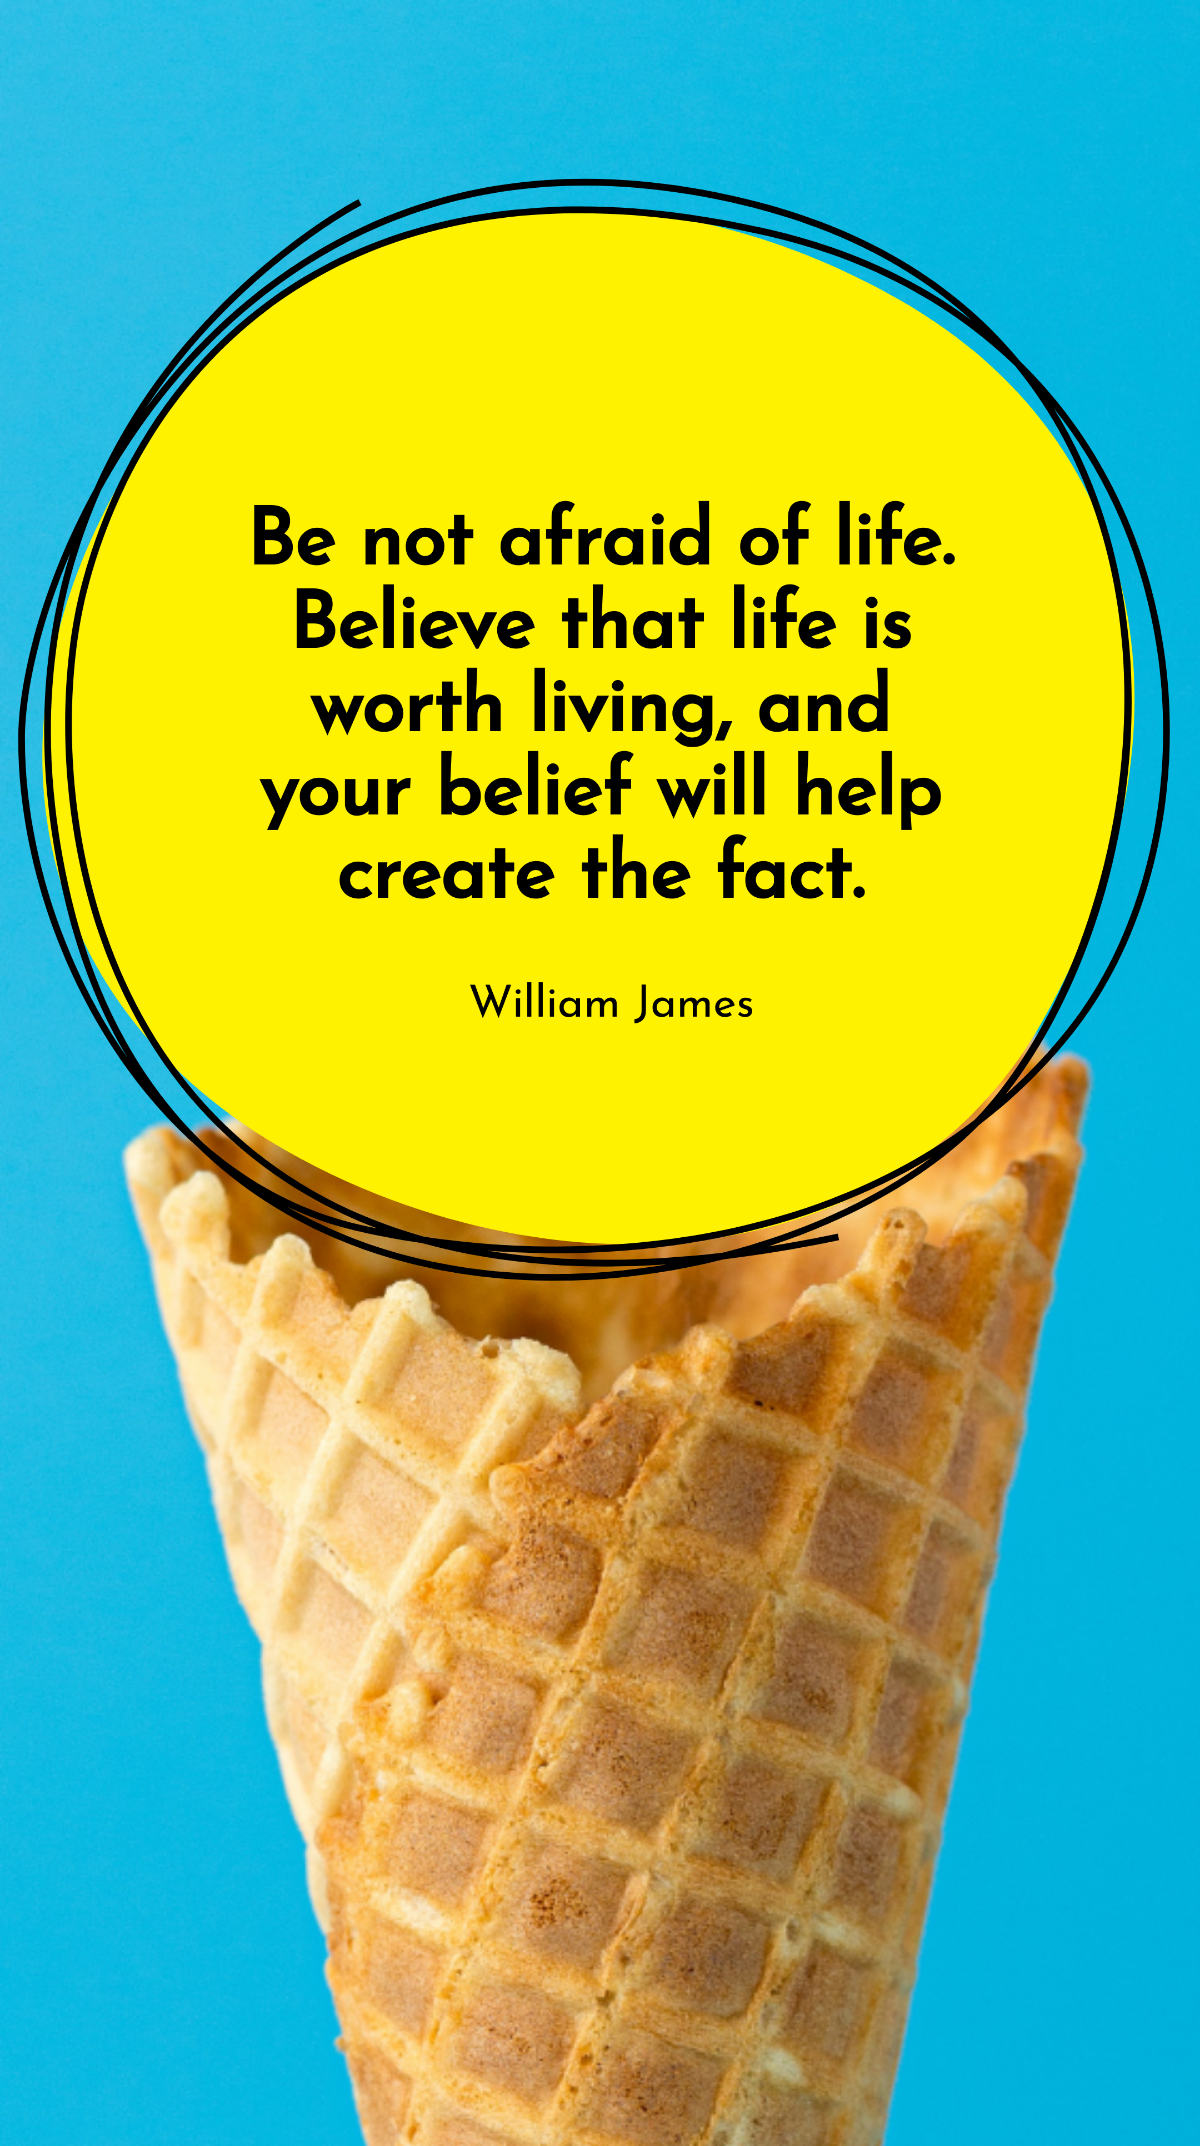 William James - Be not afraid of life. Believe that life is worth living, and your belief will help create the fact. Template